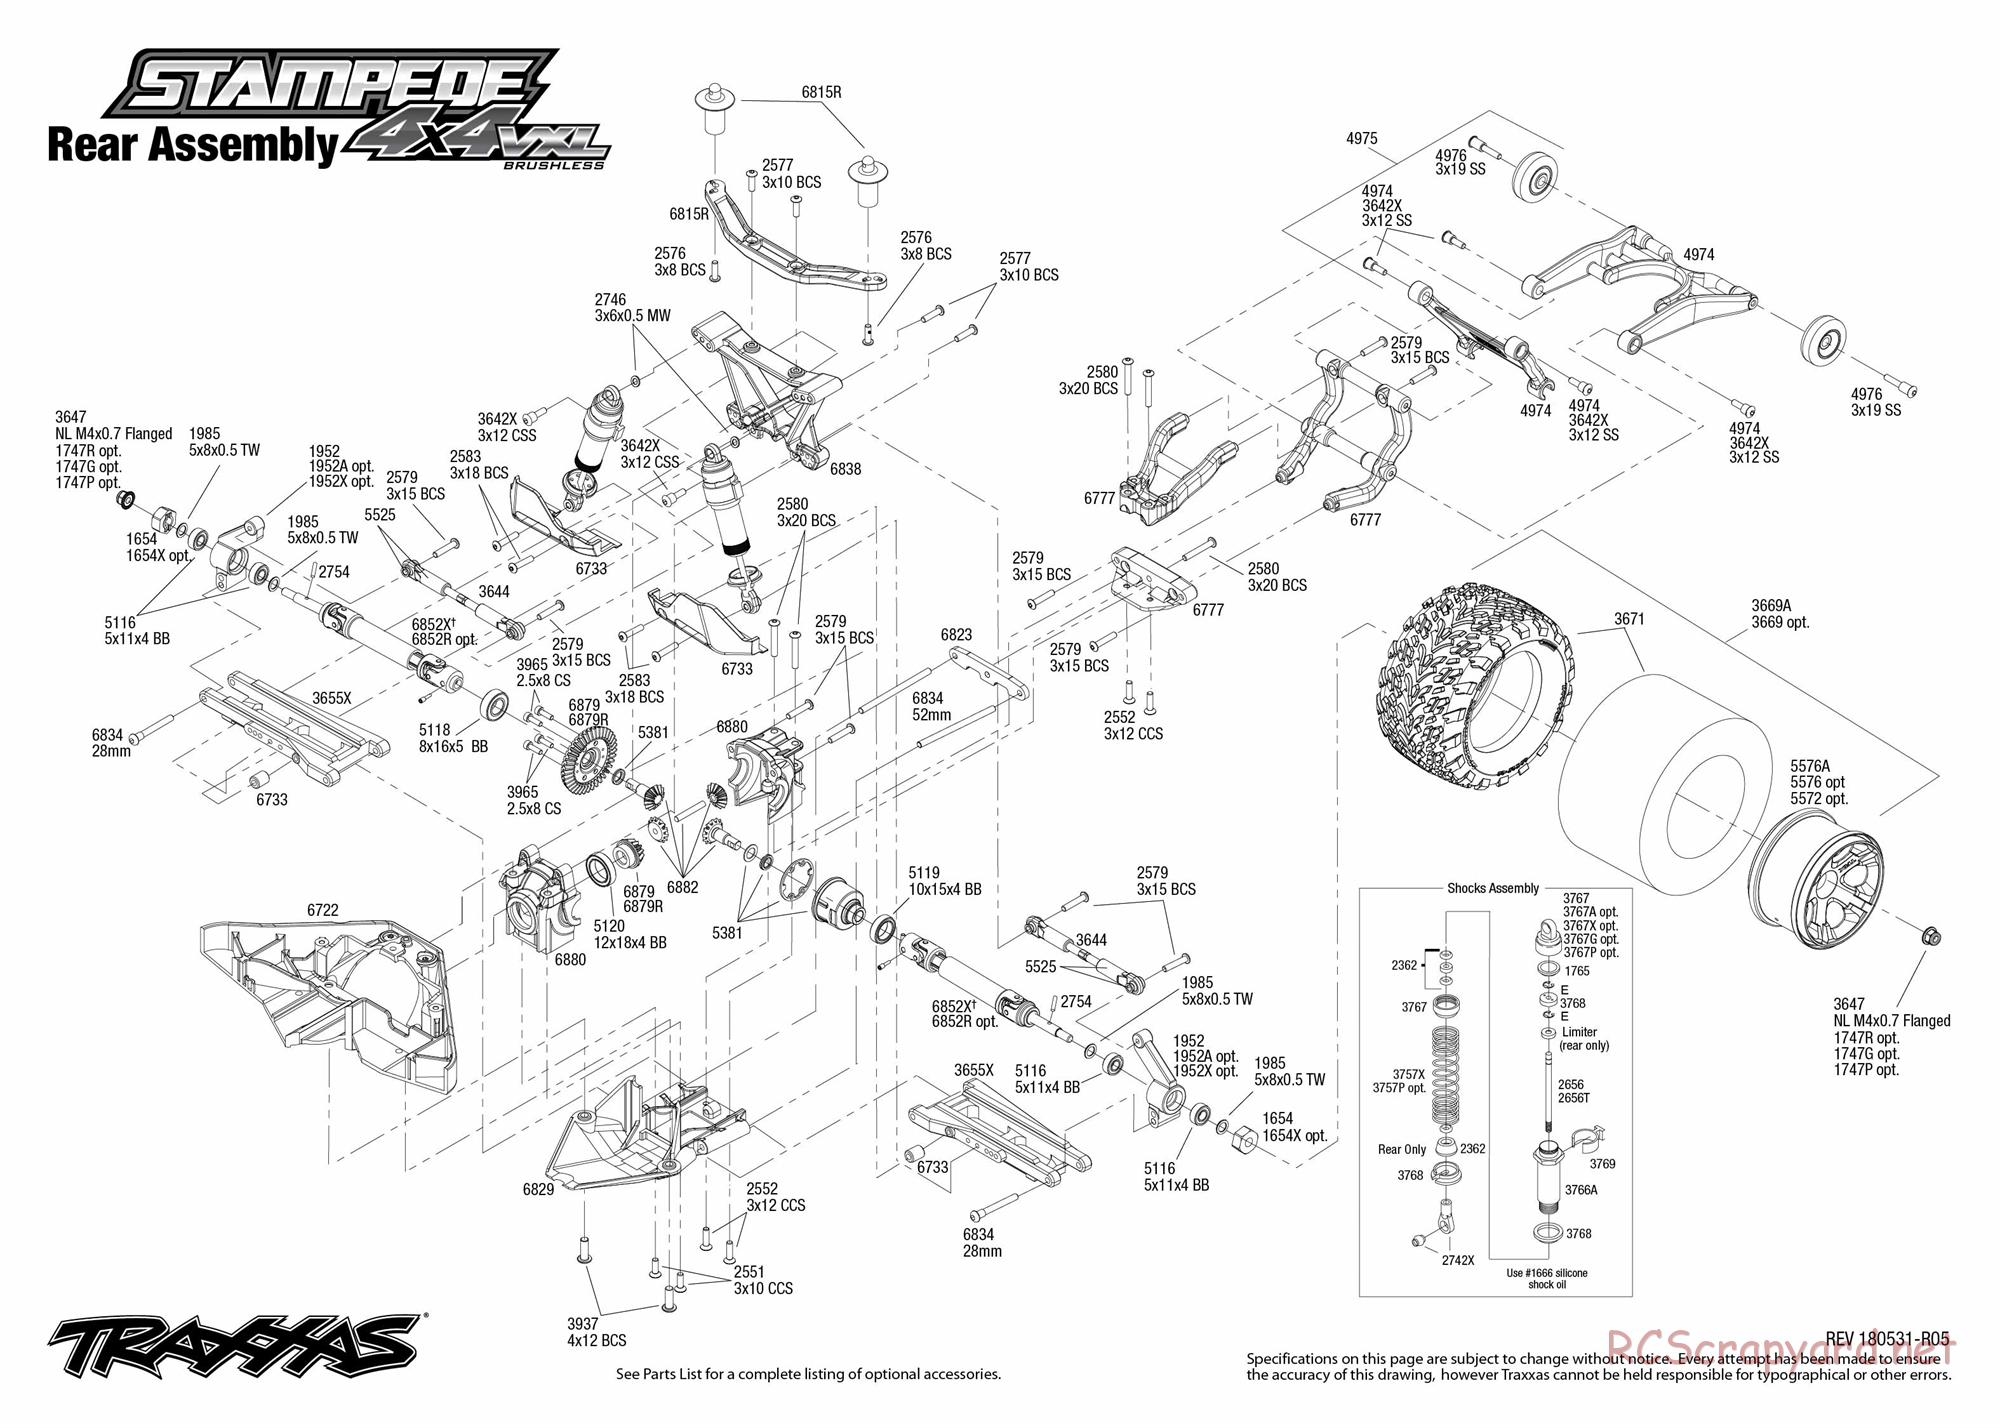 Traxxas - Stampede 4x4 VXL TSM (2015) - Exploded Views - Page 4